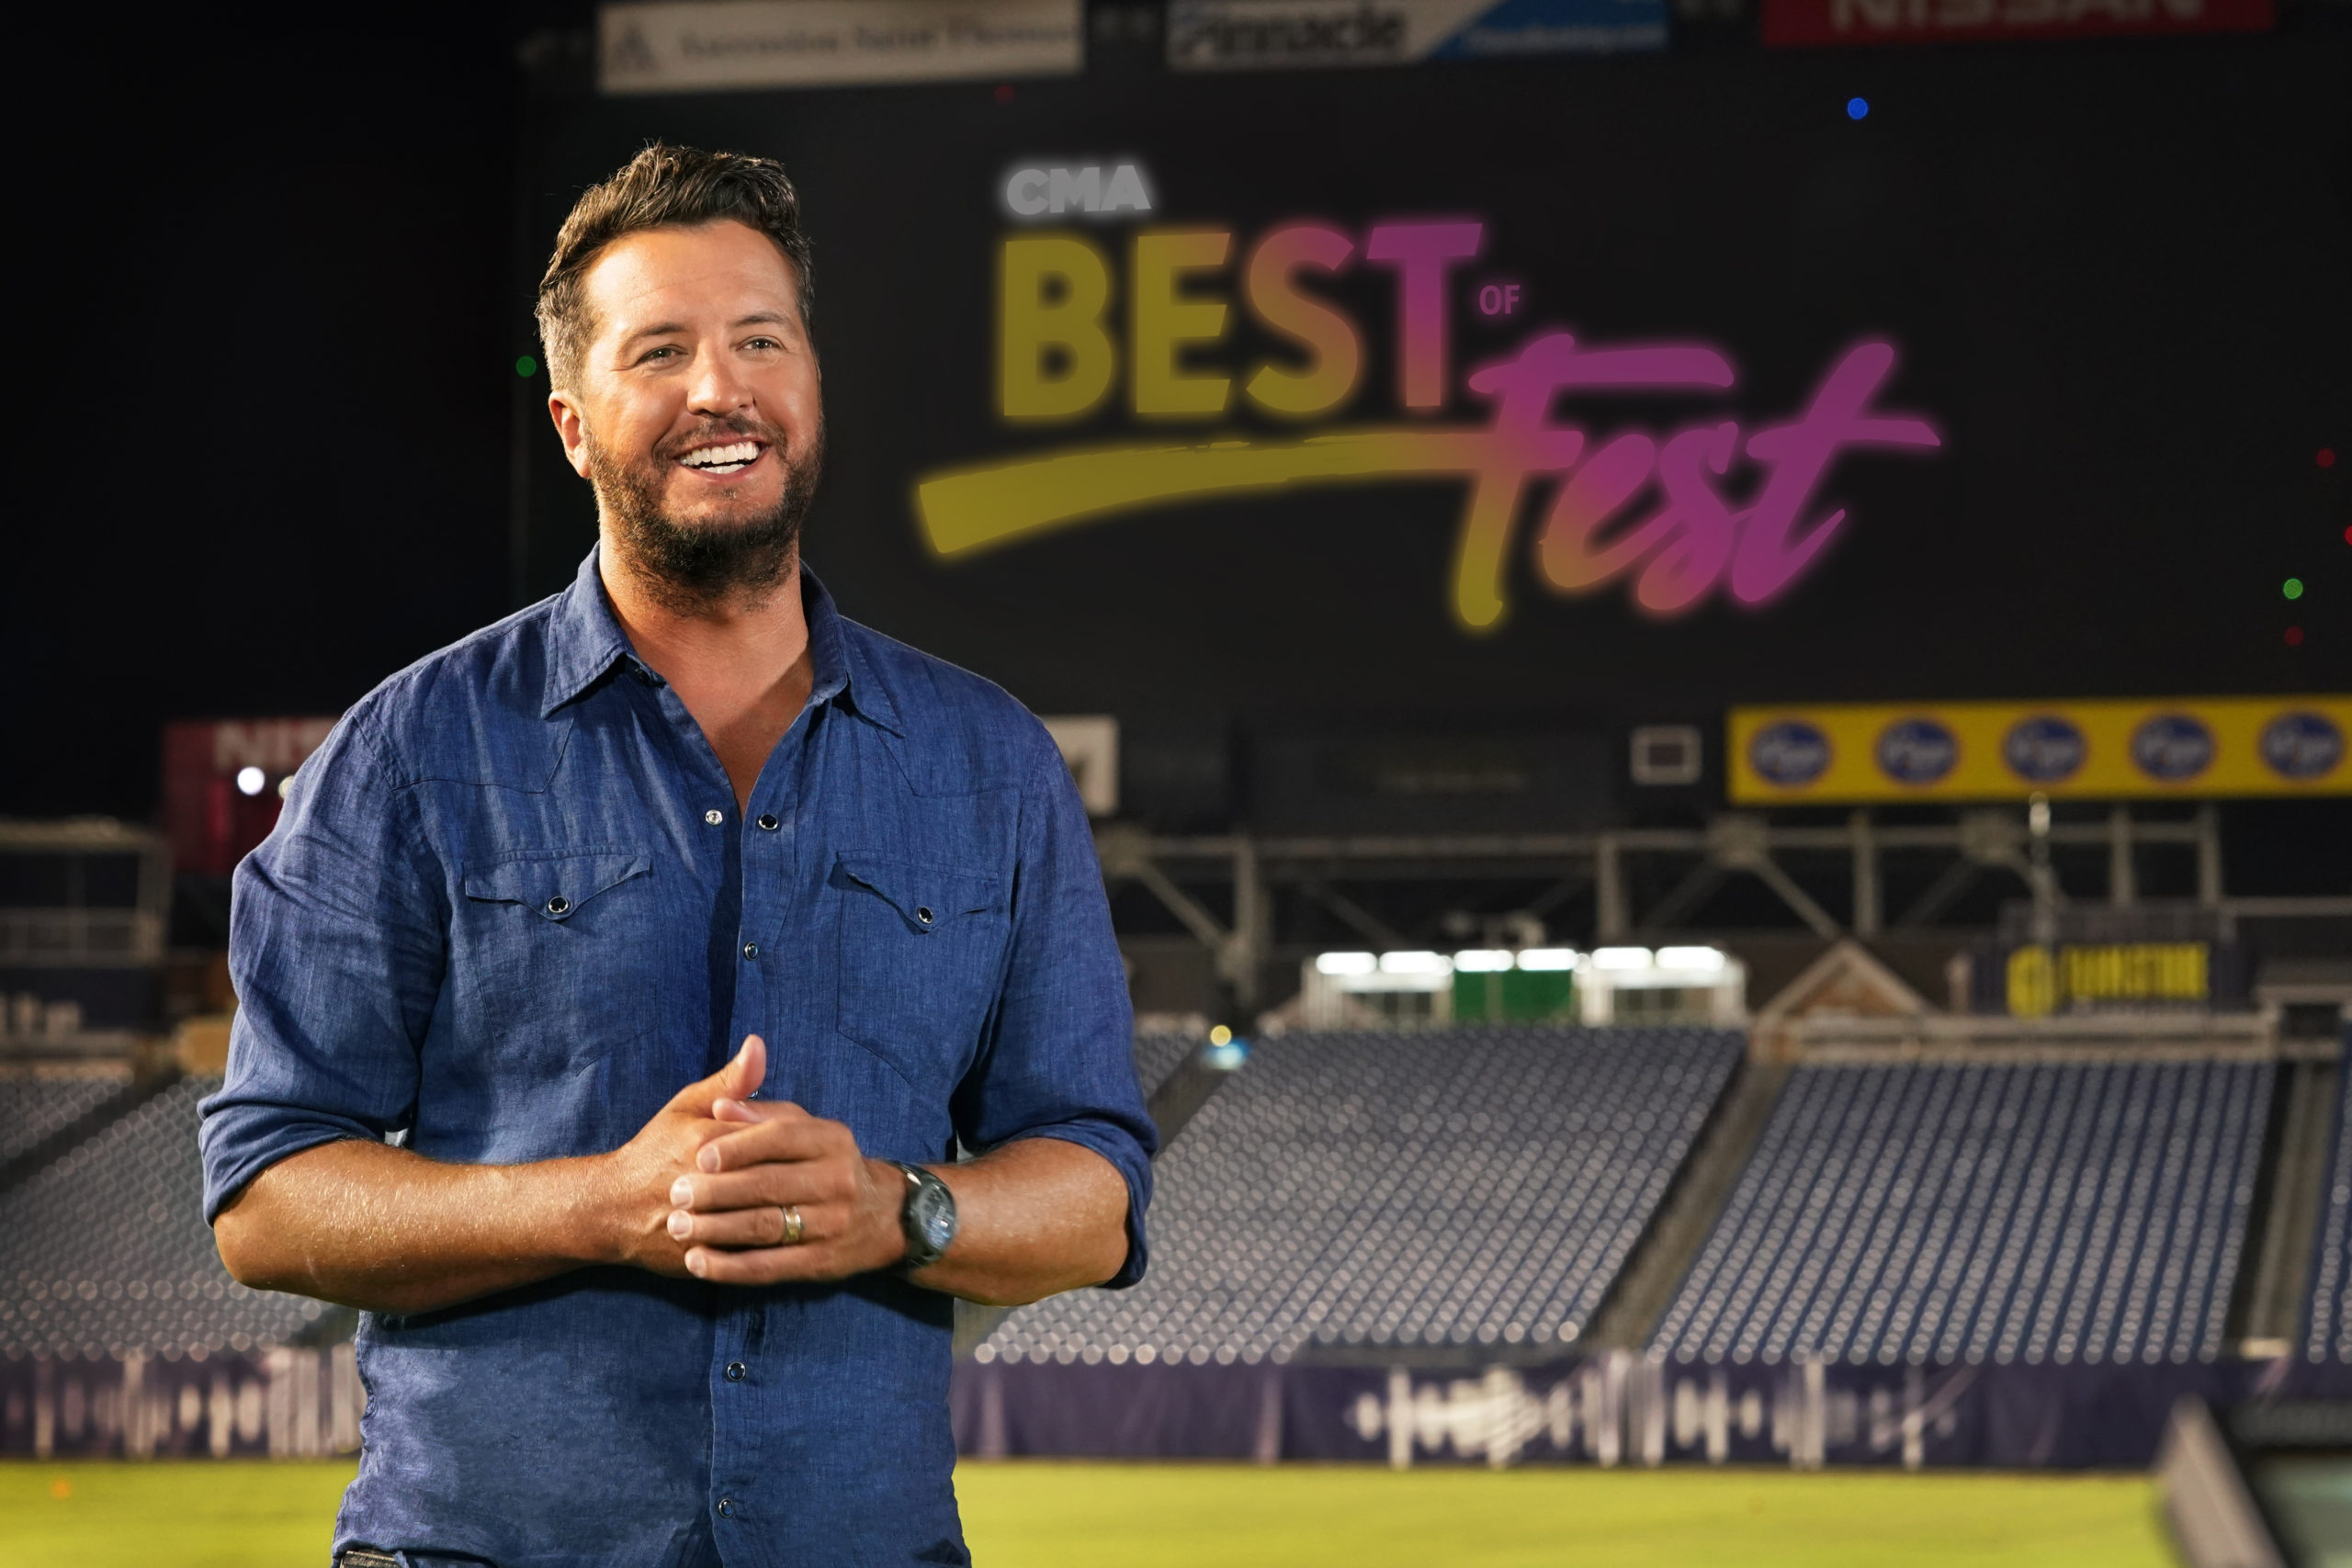 Everything You Need to Know Before Watching ‘CMA Best of Fest’ Tonight